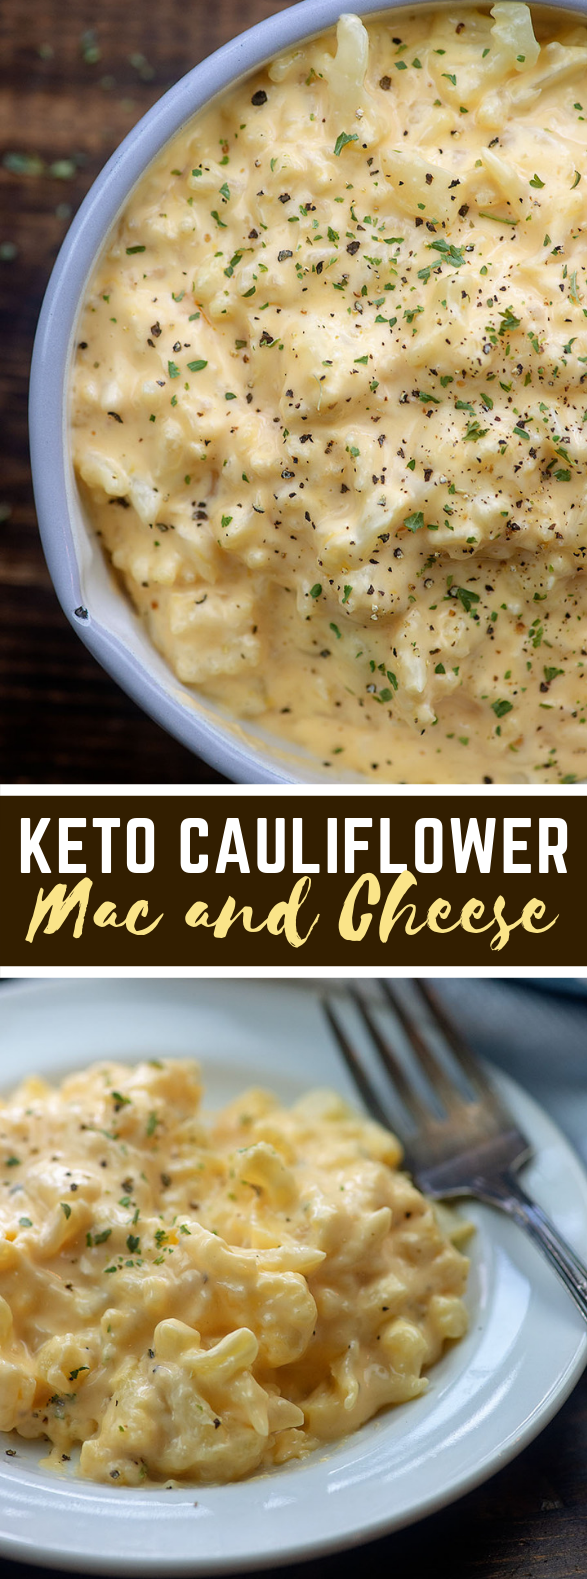 CAULIFLOWER MAC AND CHEESE #lowcarb #healthydiet